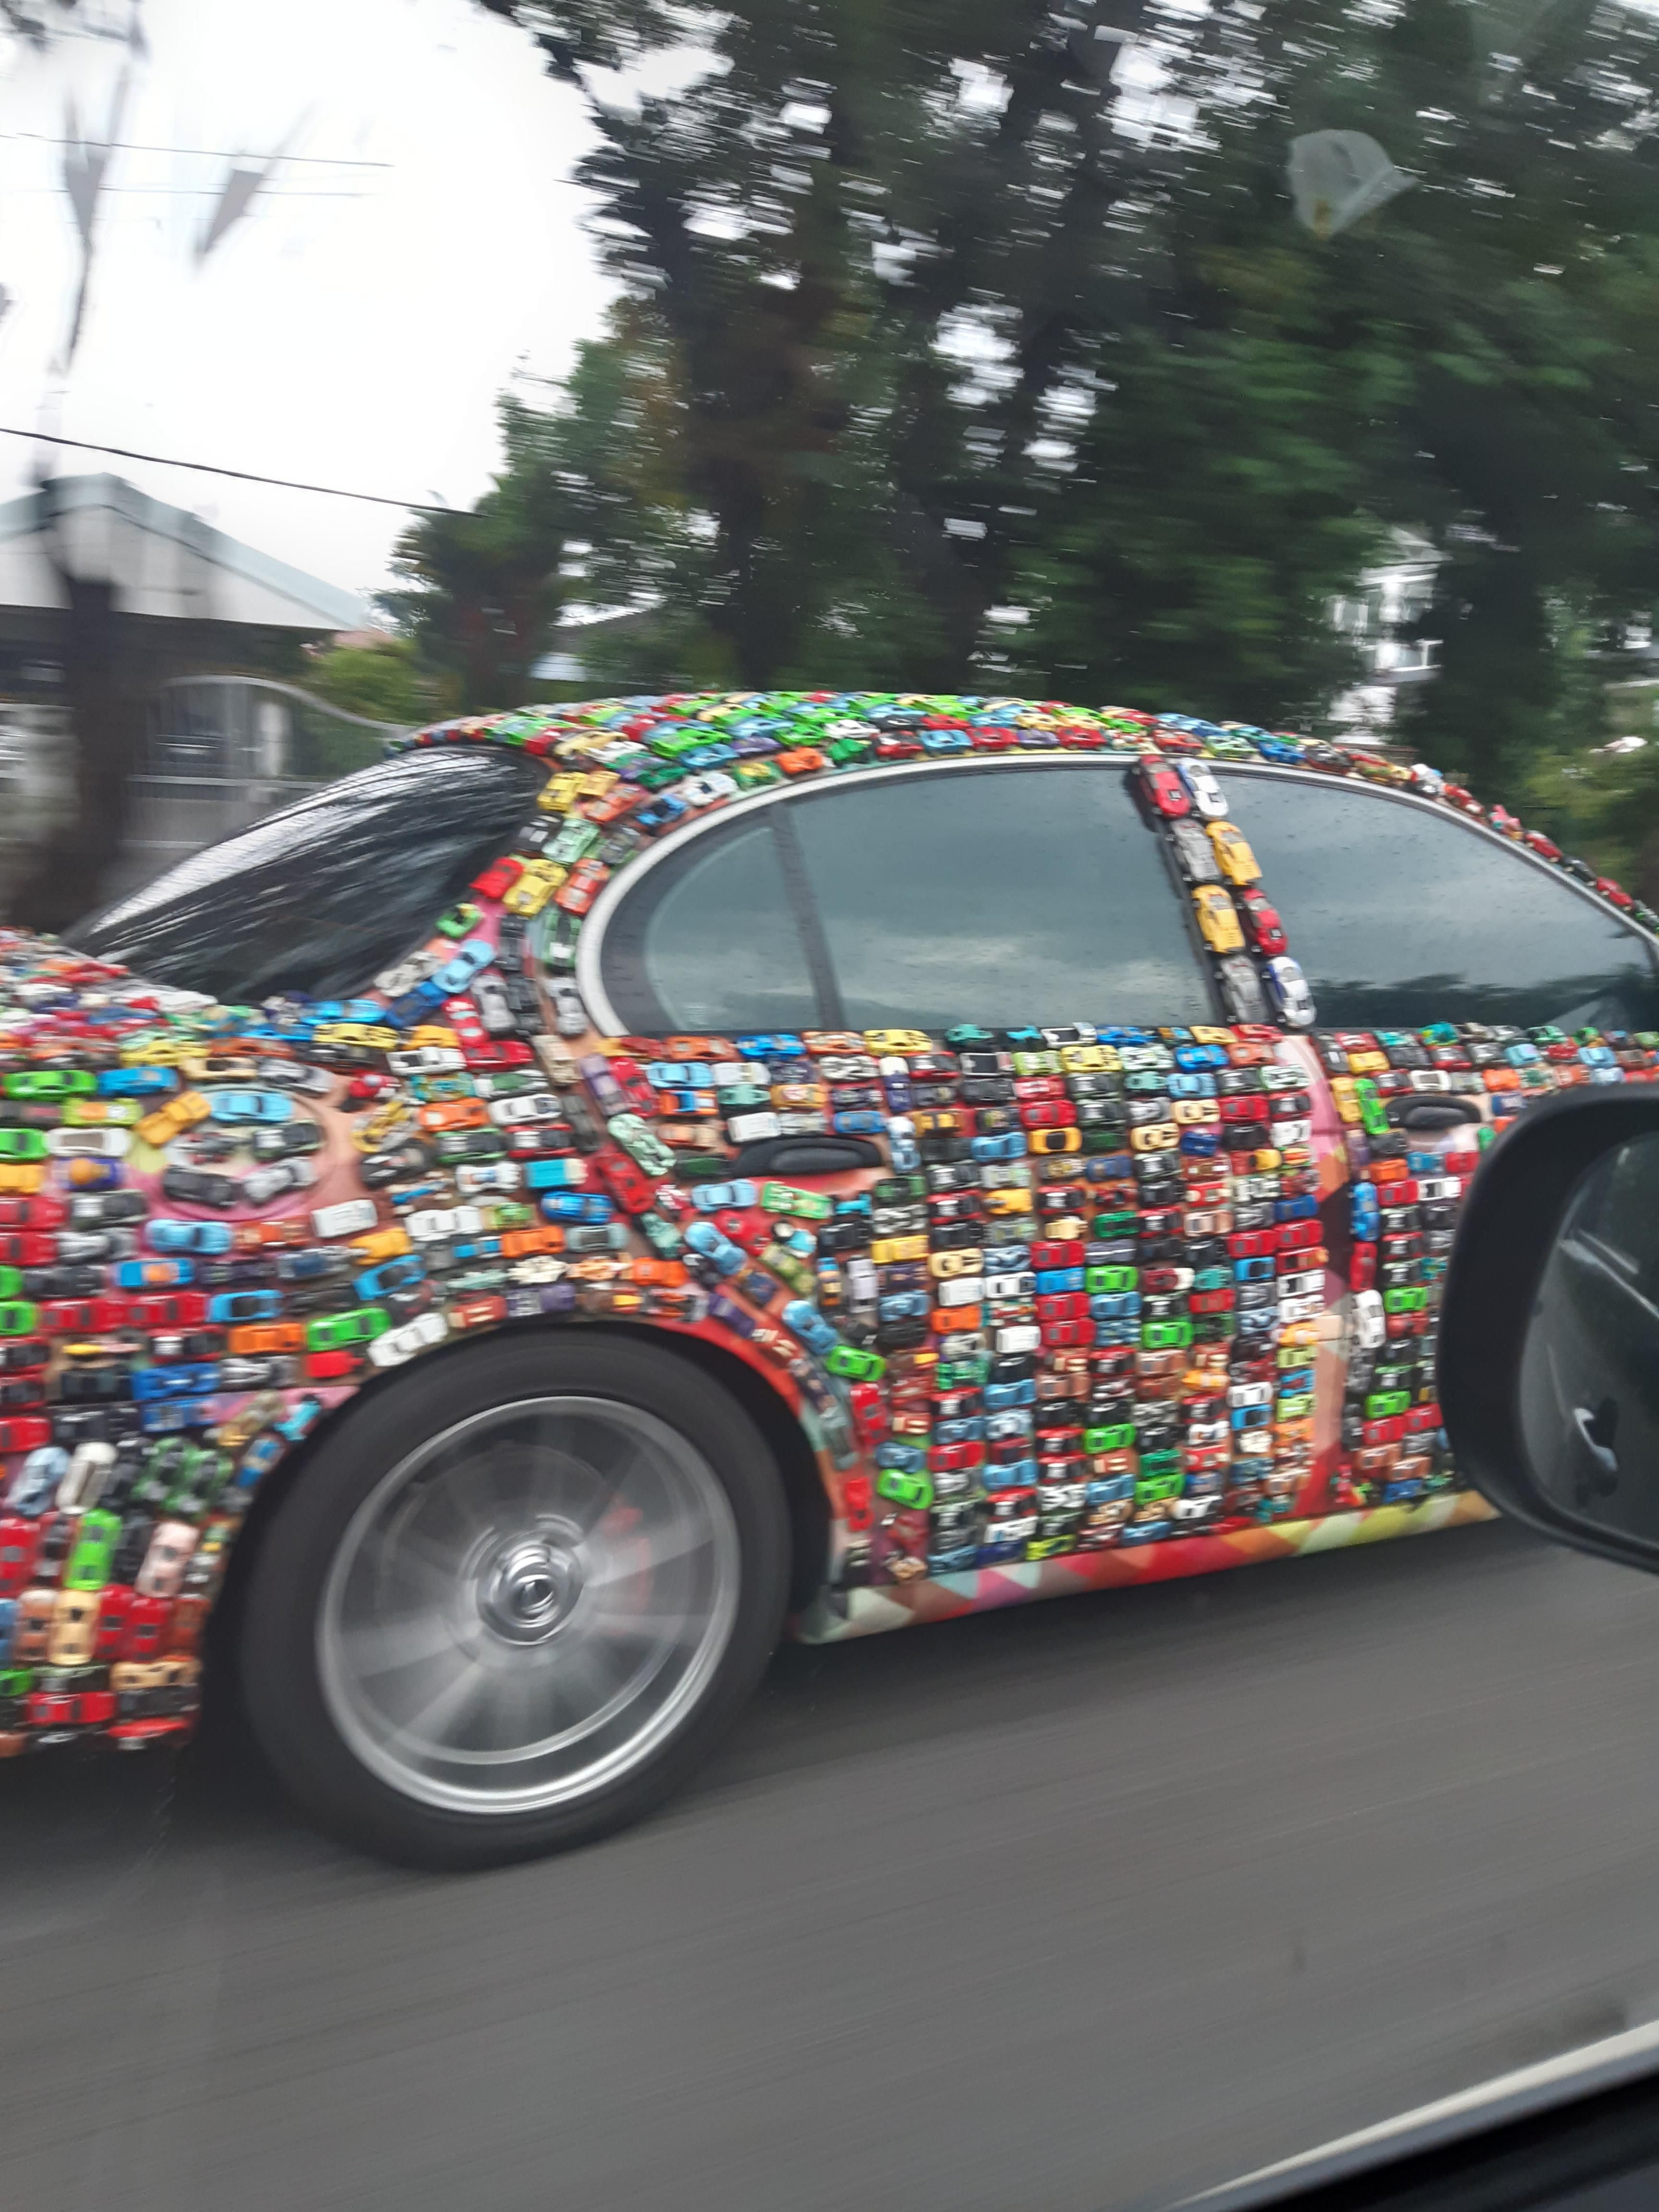 This car drove passed us. Deadass thought its just the skin. Its cars. Tiny cars. Fricking tiny cars.